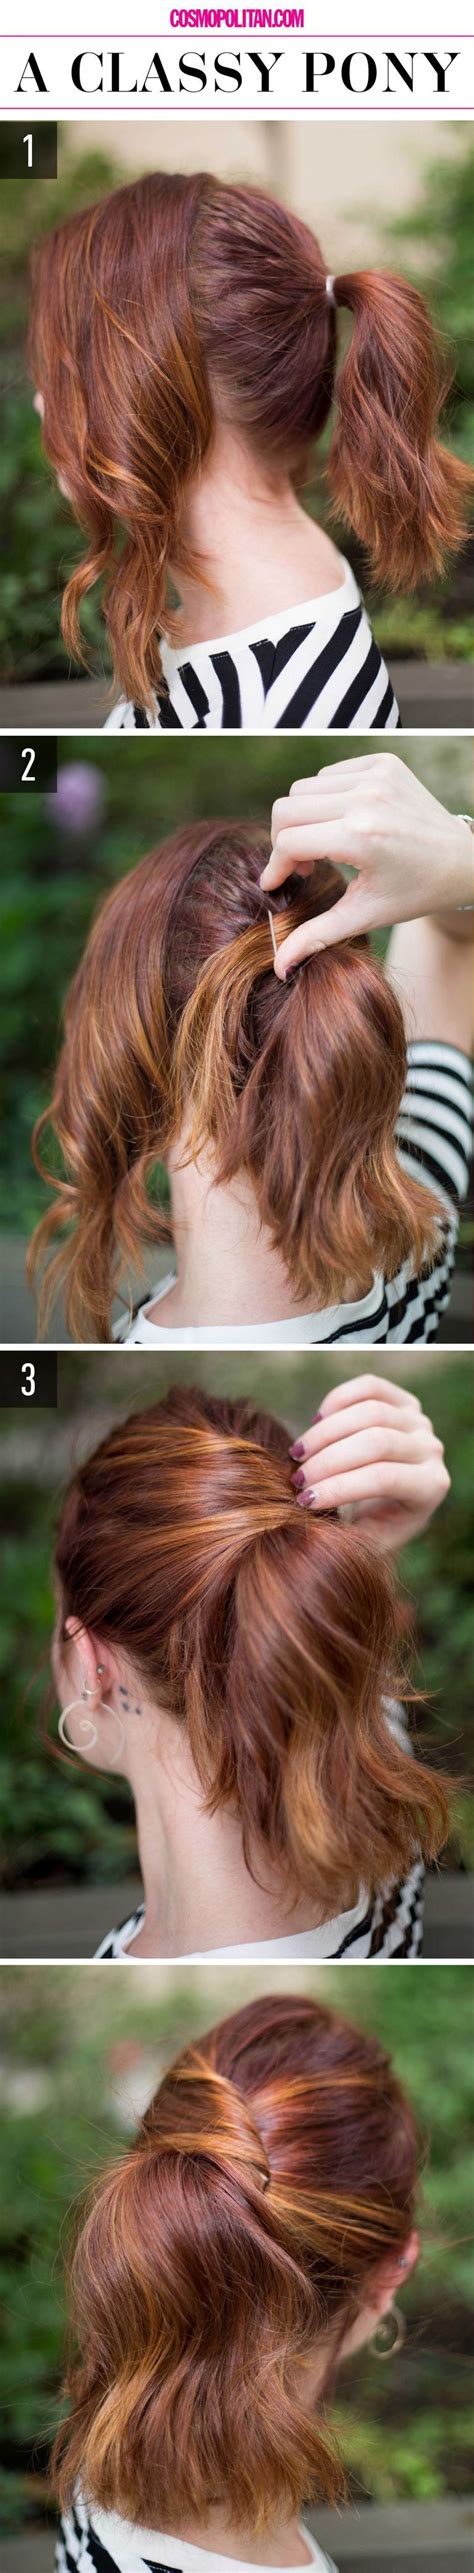 5 Minute Lazy Hairstyles For Medium Hair 5 Five Minute Hairstyles For